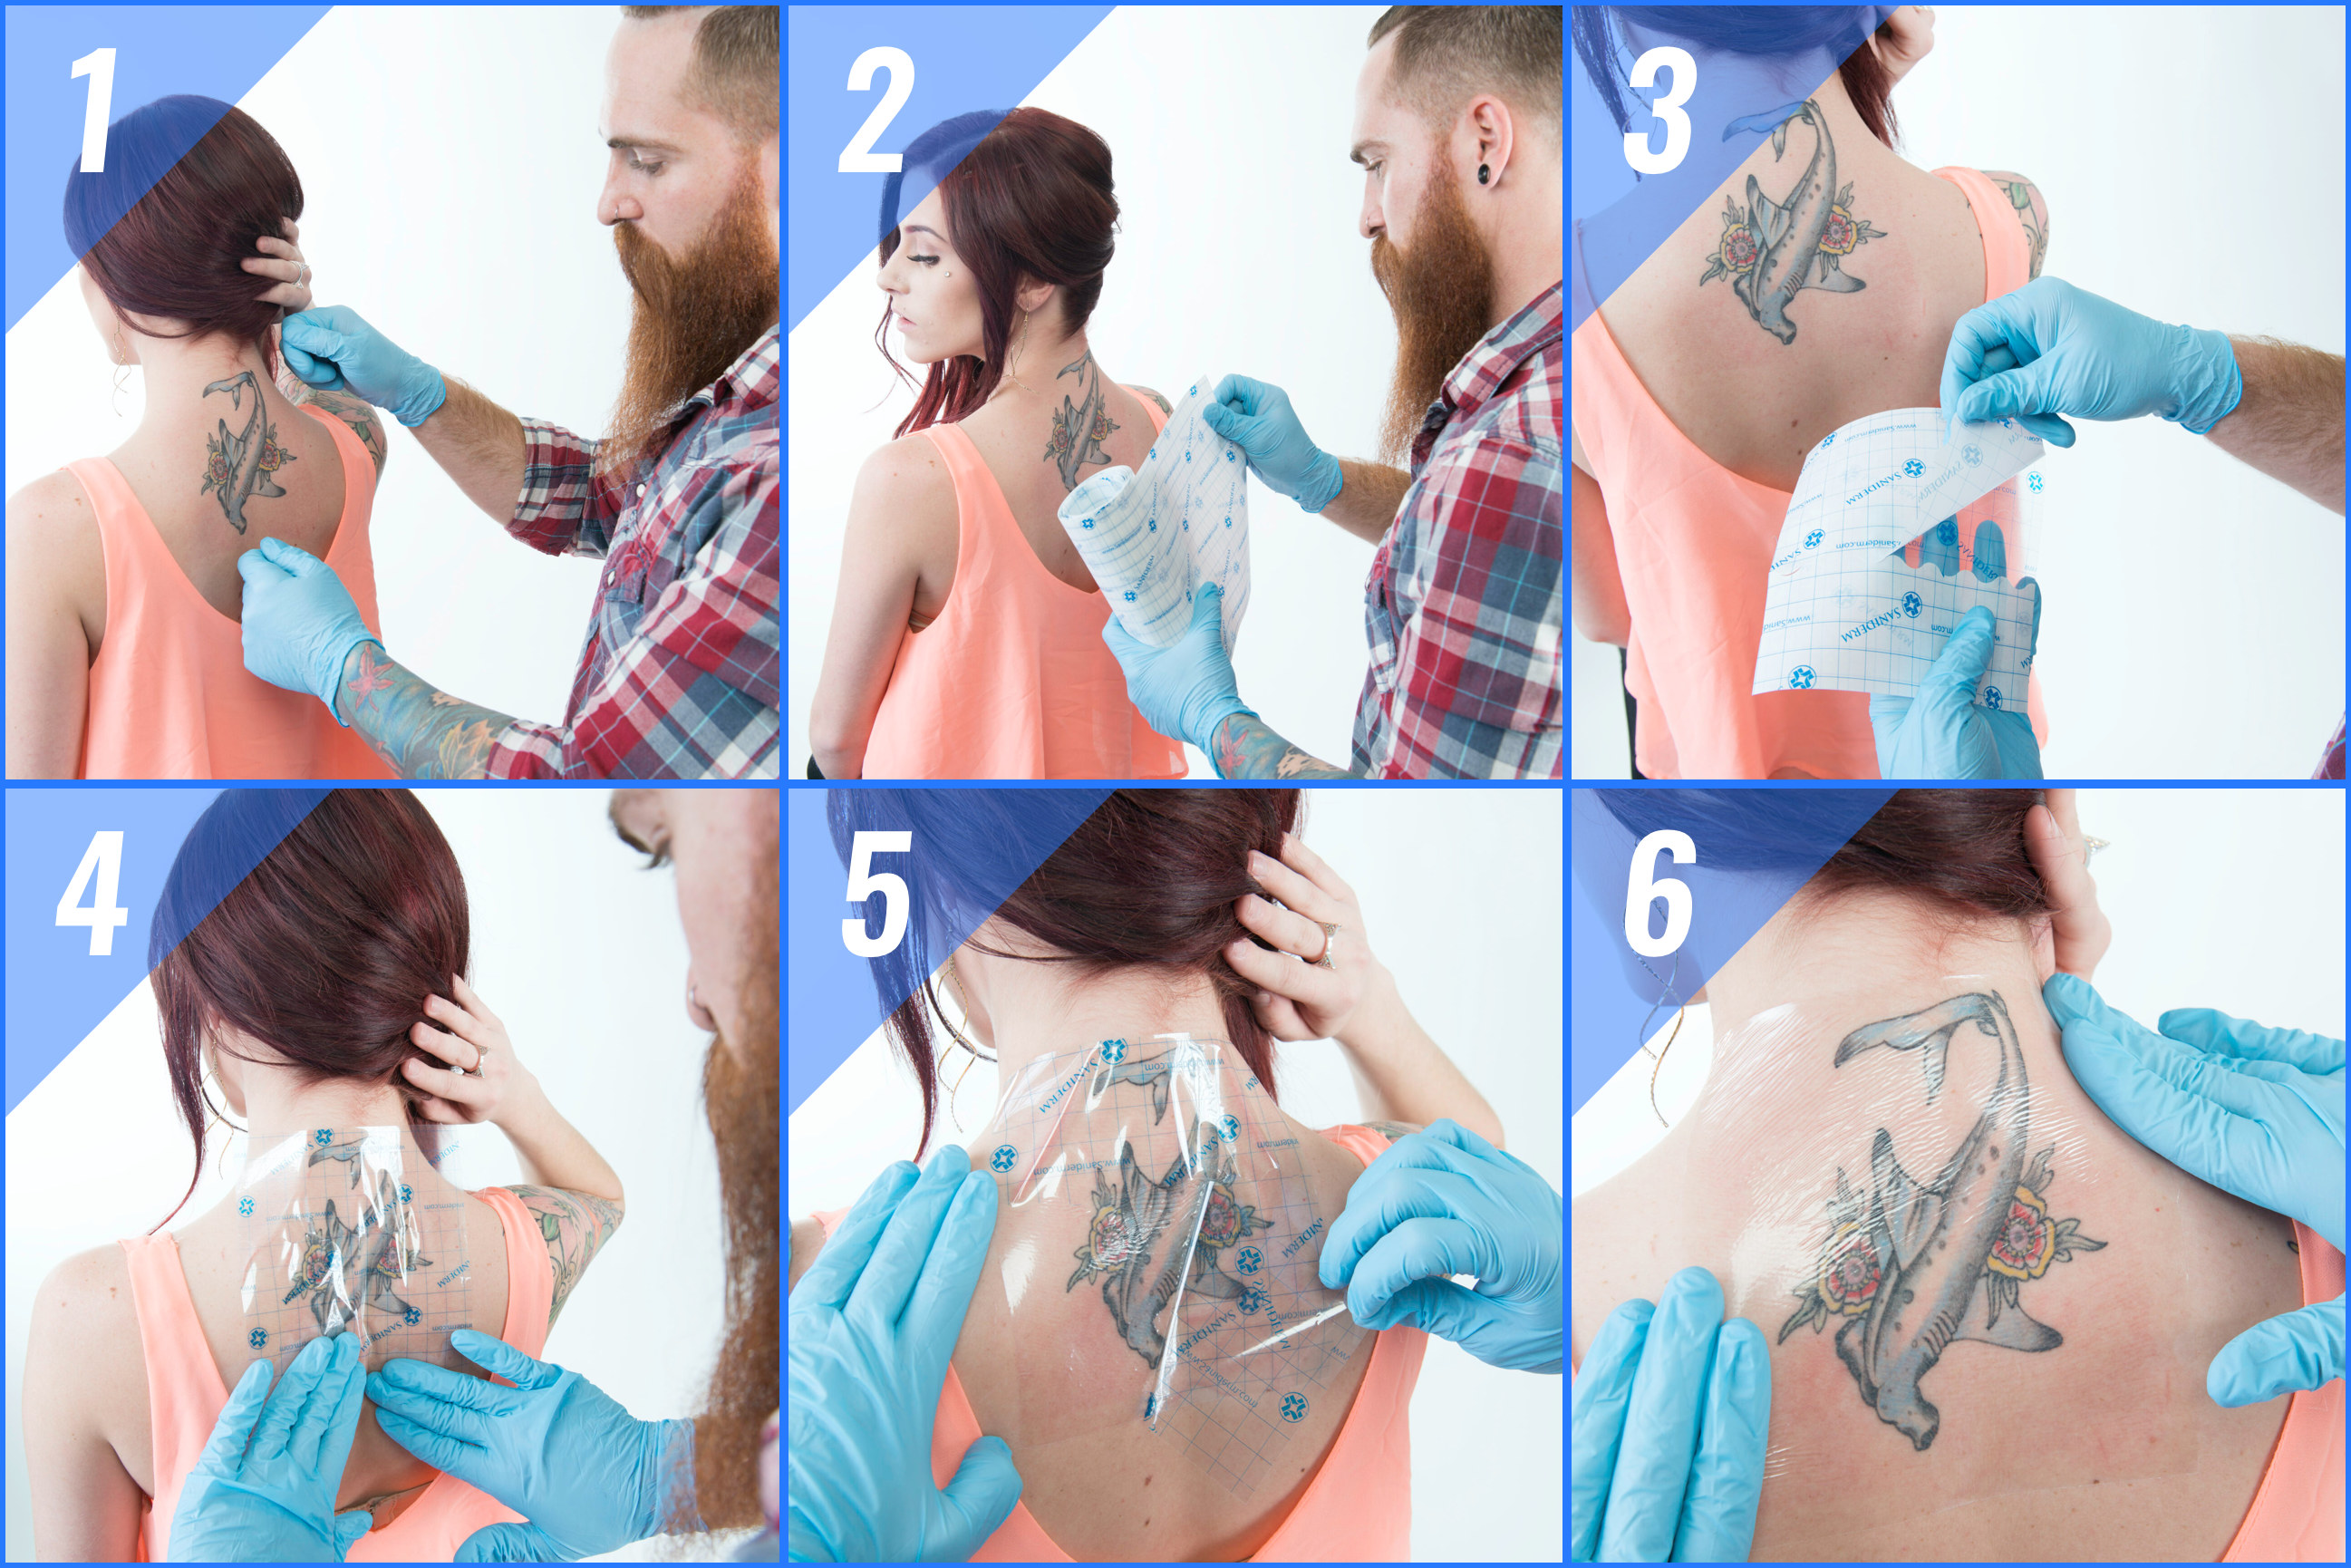 The Many Stages of a Healing Tattoo | 1984 Tattoos Studio